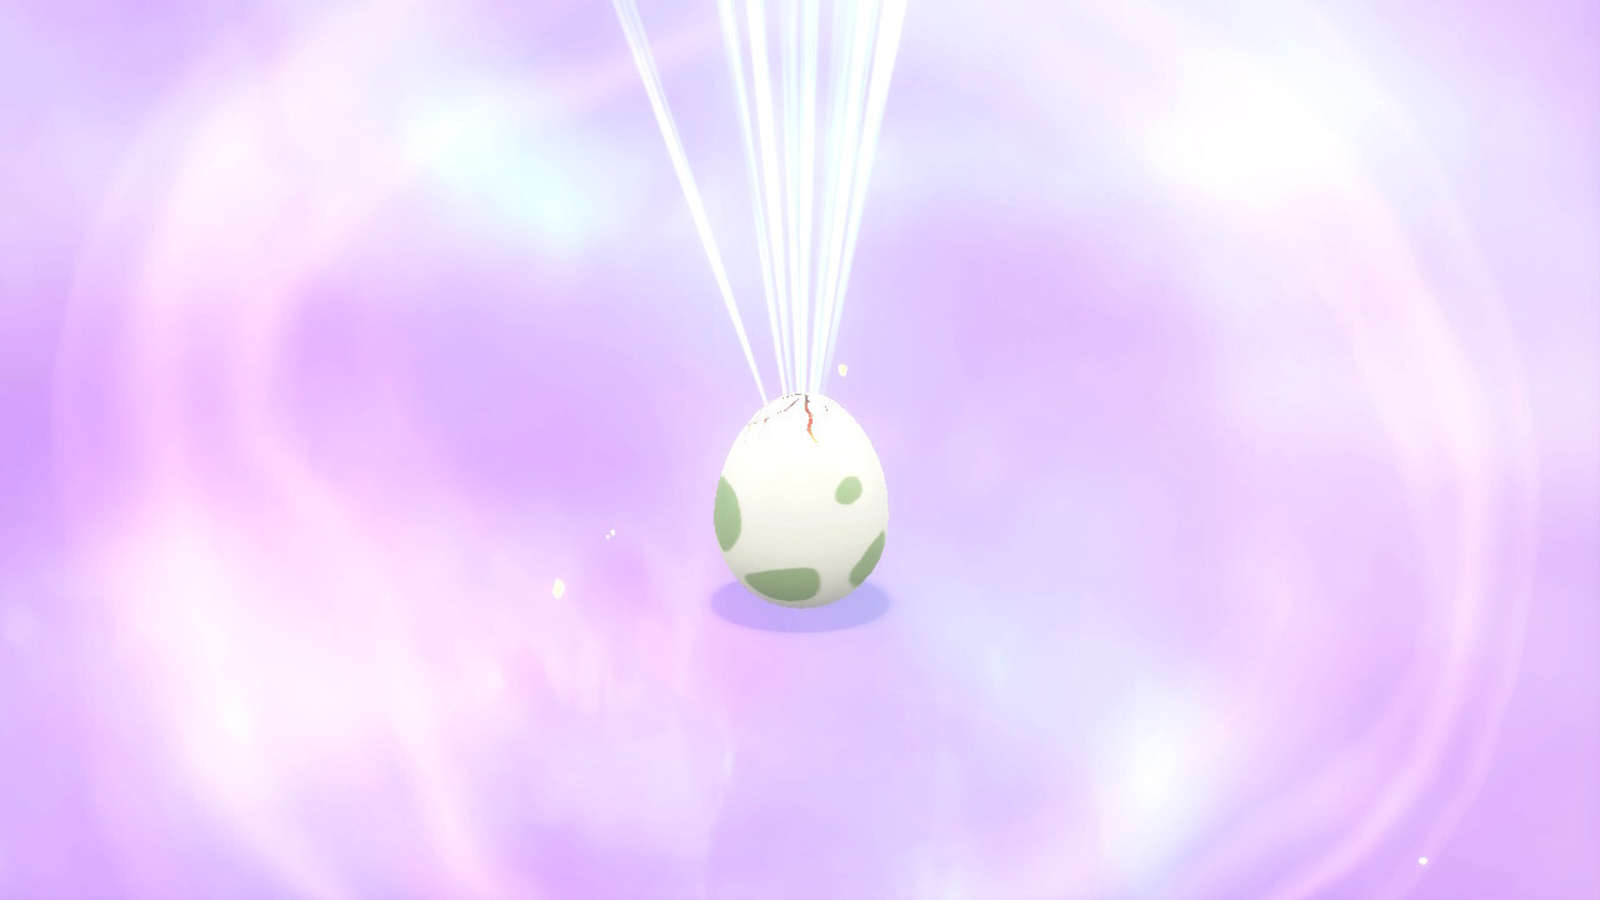 Pokemon Scarlet & Violet: How to Get a 6 IV Ditto